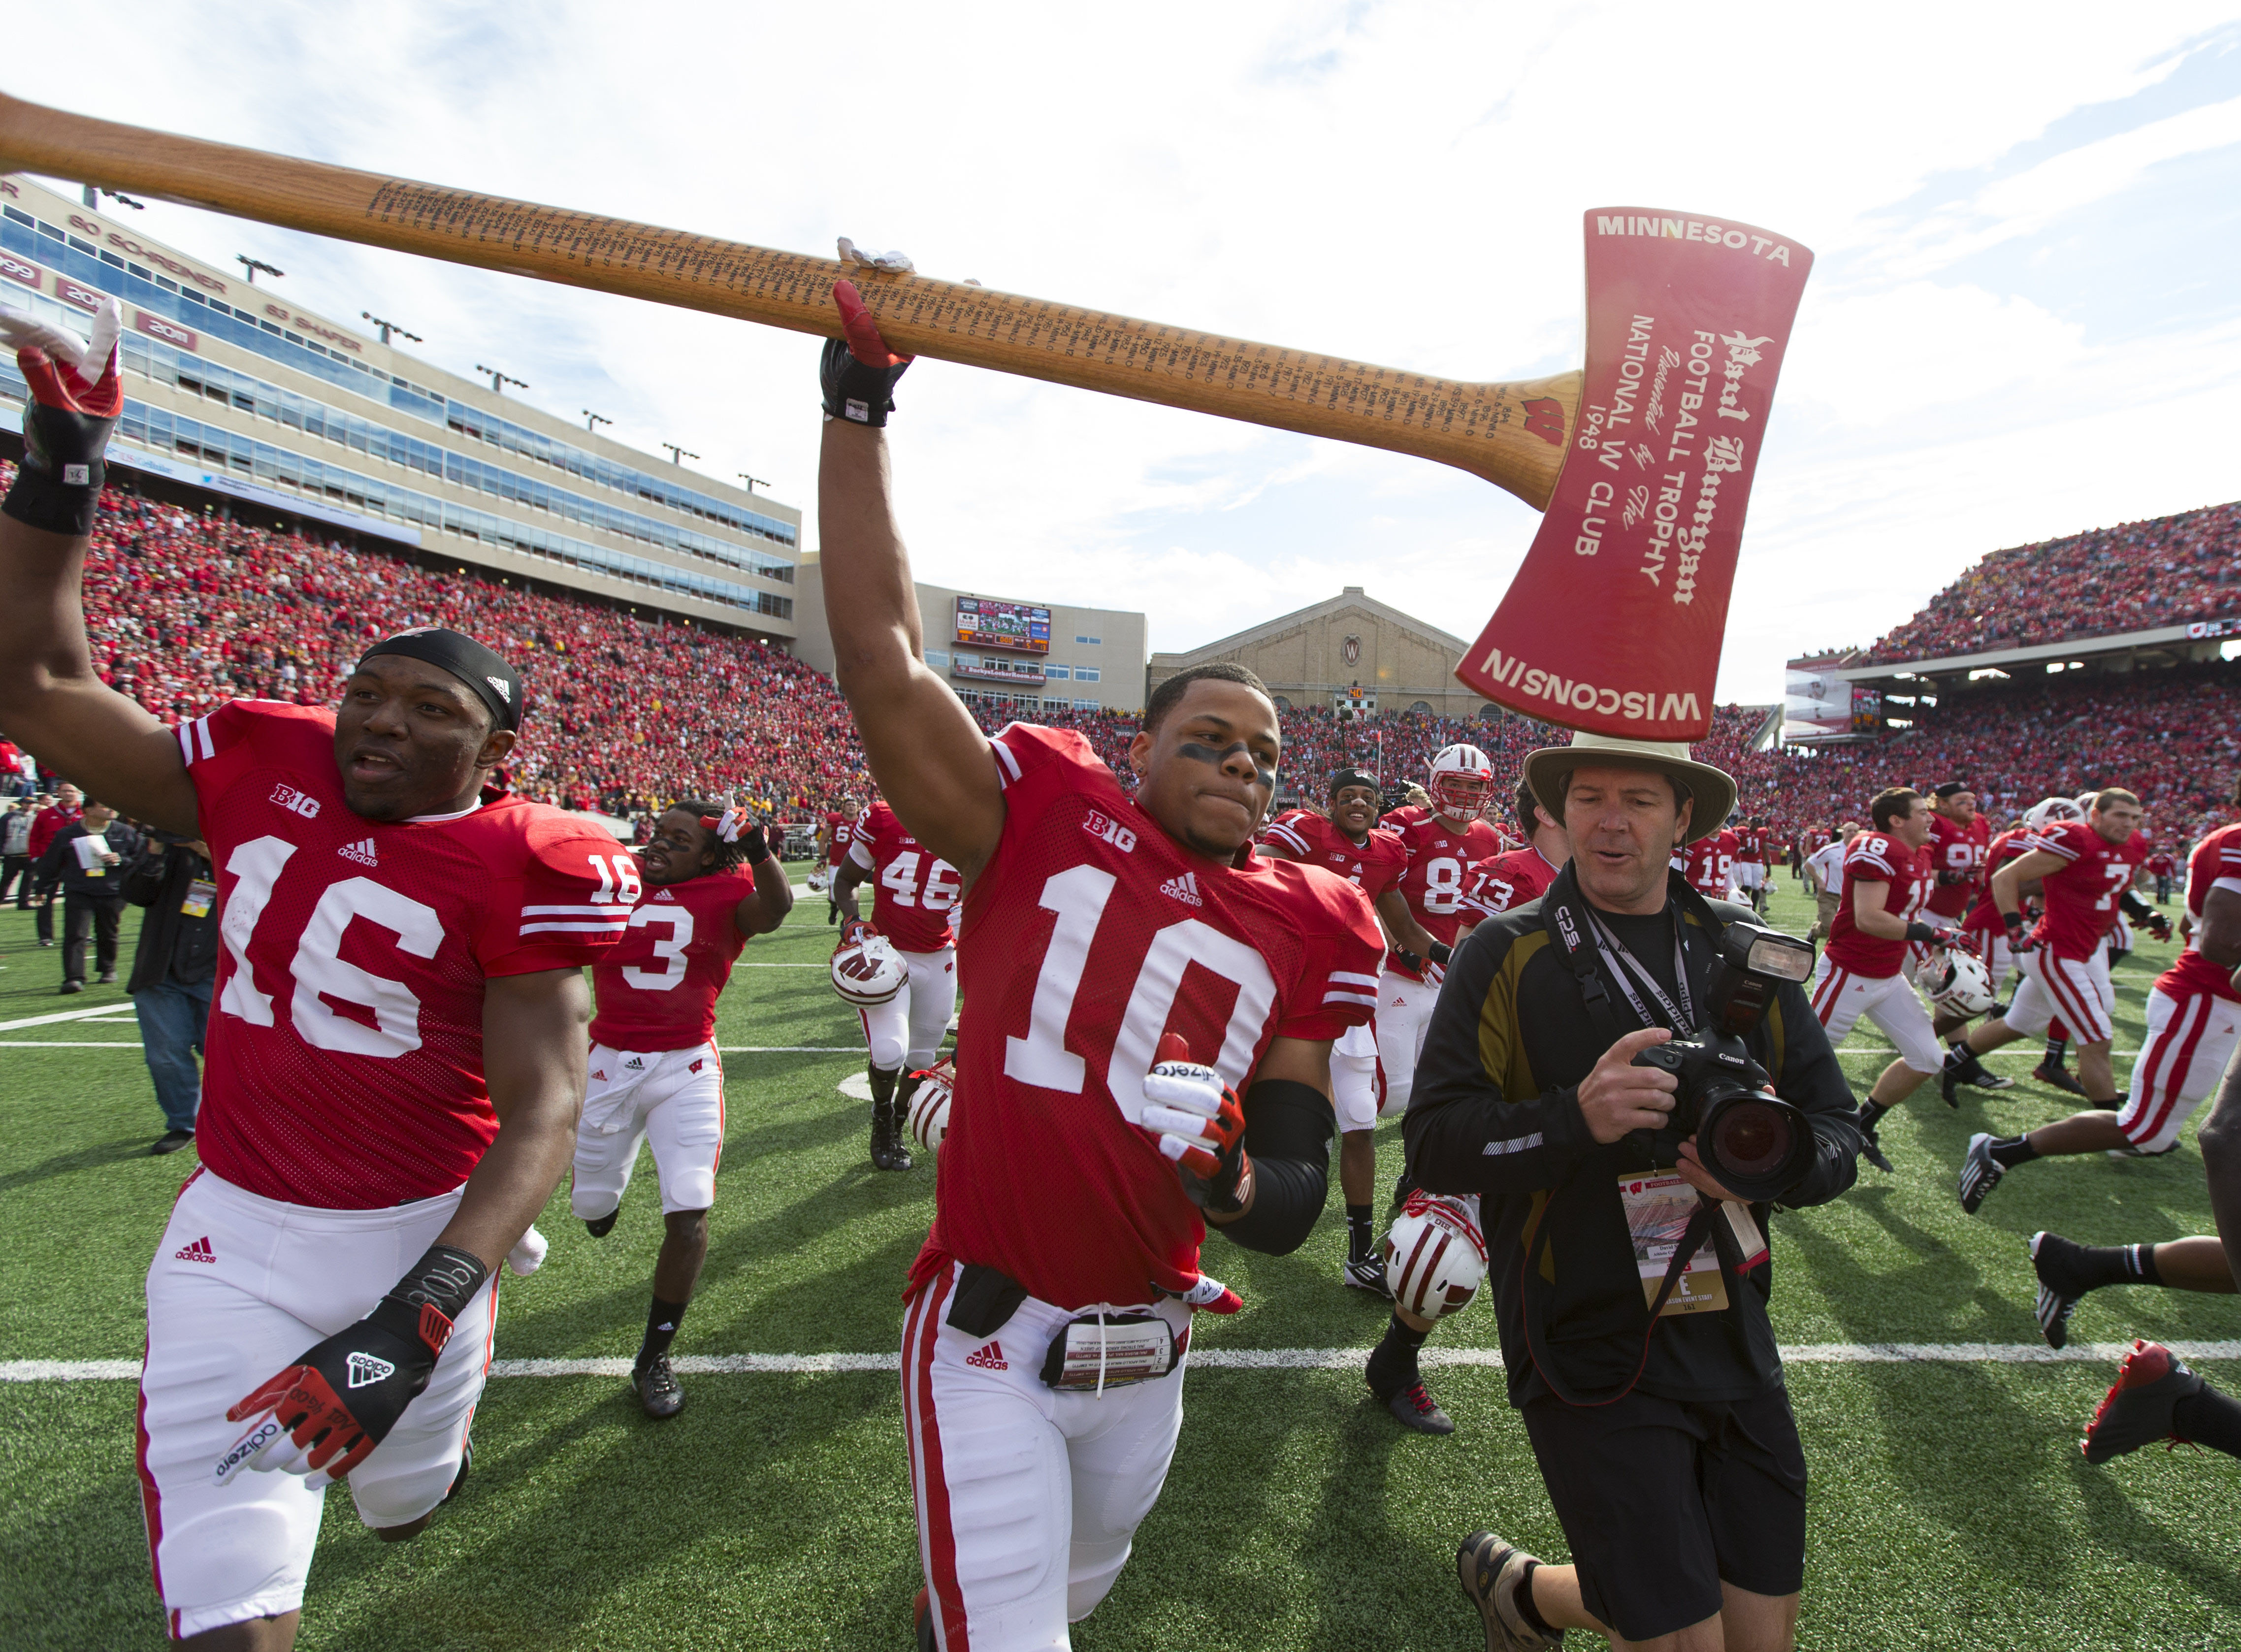 Oct 20, 2012; Madison, WI, USA; Wisconsin Badgers defensive back Devin Smith (10) (center) and wide receiver Reggie Love (16) (left) celebrate with the Paul Bunyan Axe following the game against the Minnesota Golden Gophers at Camp Randall Stadium. Wisconsin defeated Minnesota 38-13. Mandatory Credit: Jeff Hanisch-US PRESSWIRE ORG XMIT: USPW-91318 ORIG FILE ID: 20121020_gav_sh5_081.JPG